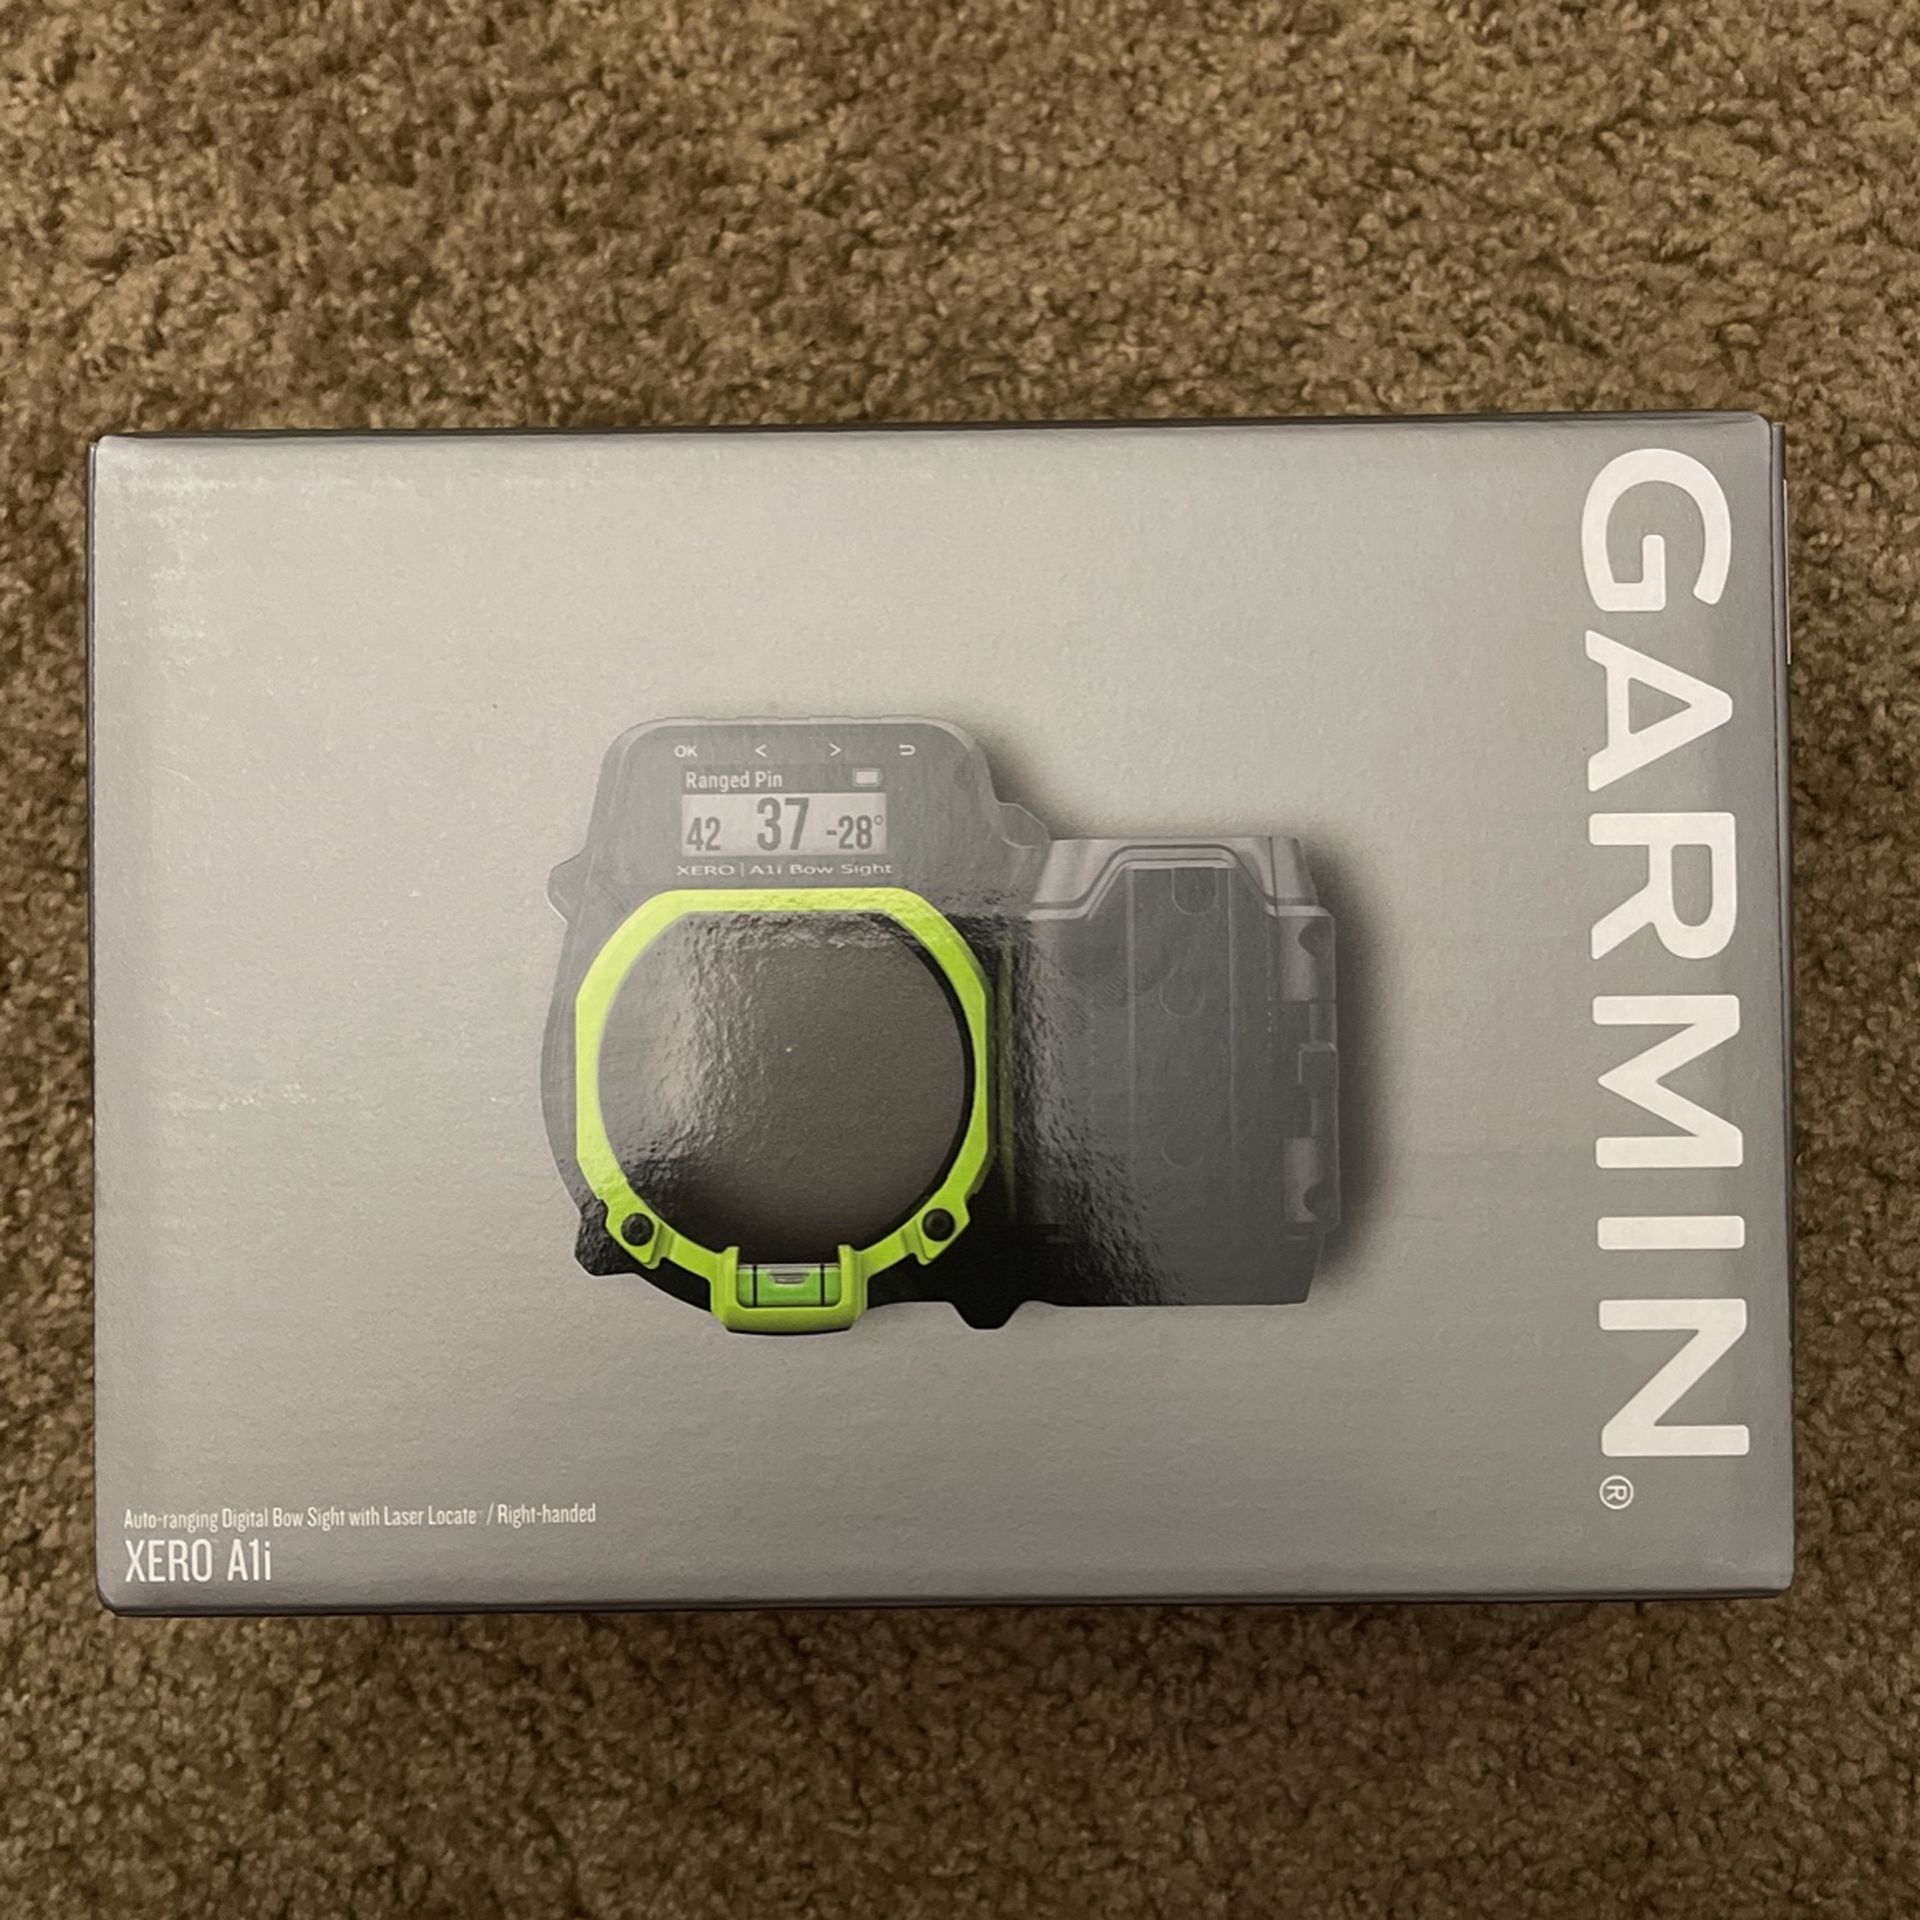 Garmin Xero A1i Right Hand Price Is ABSOLUTELY FIRM